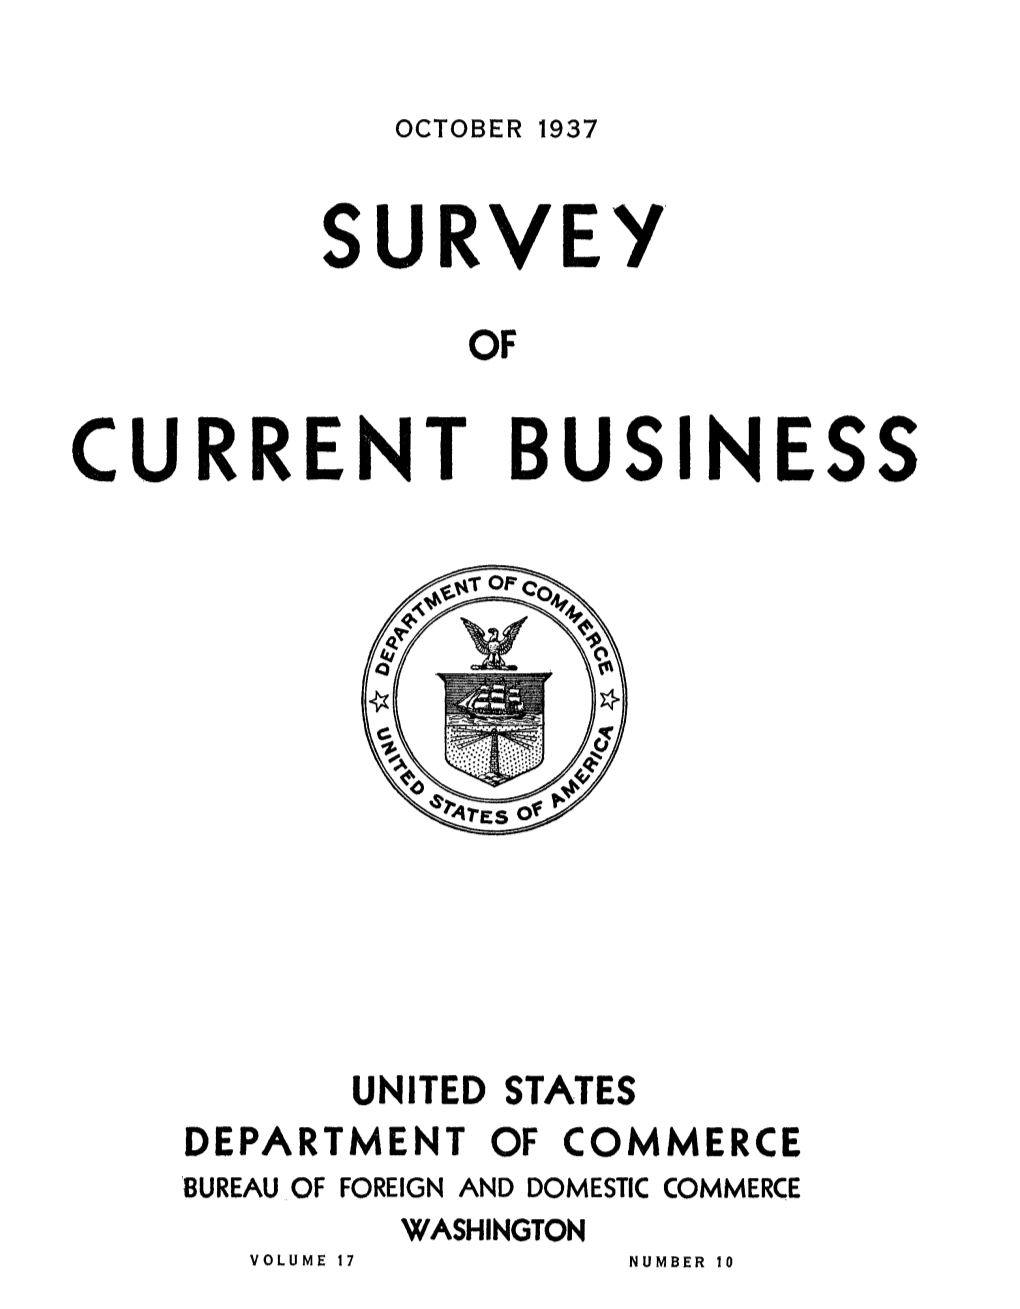 SURVEY of CURRENT BUSINESS October 1937